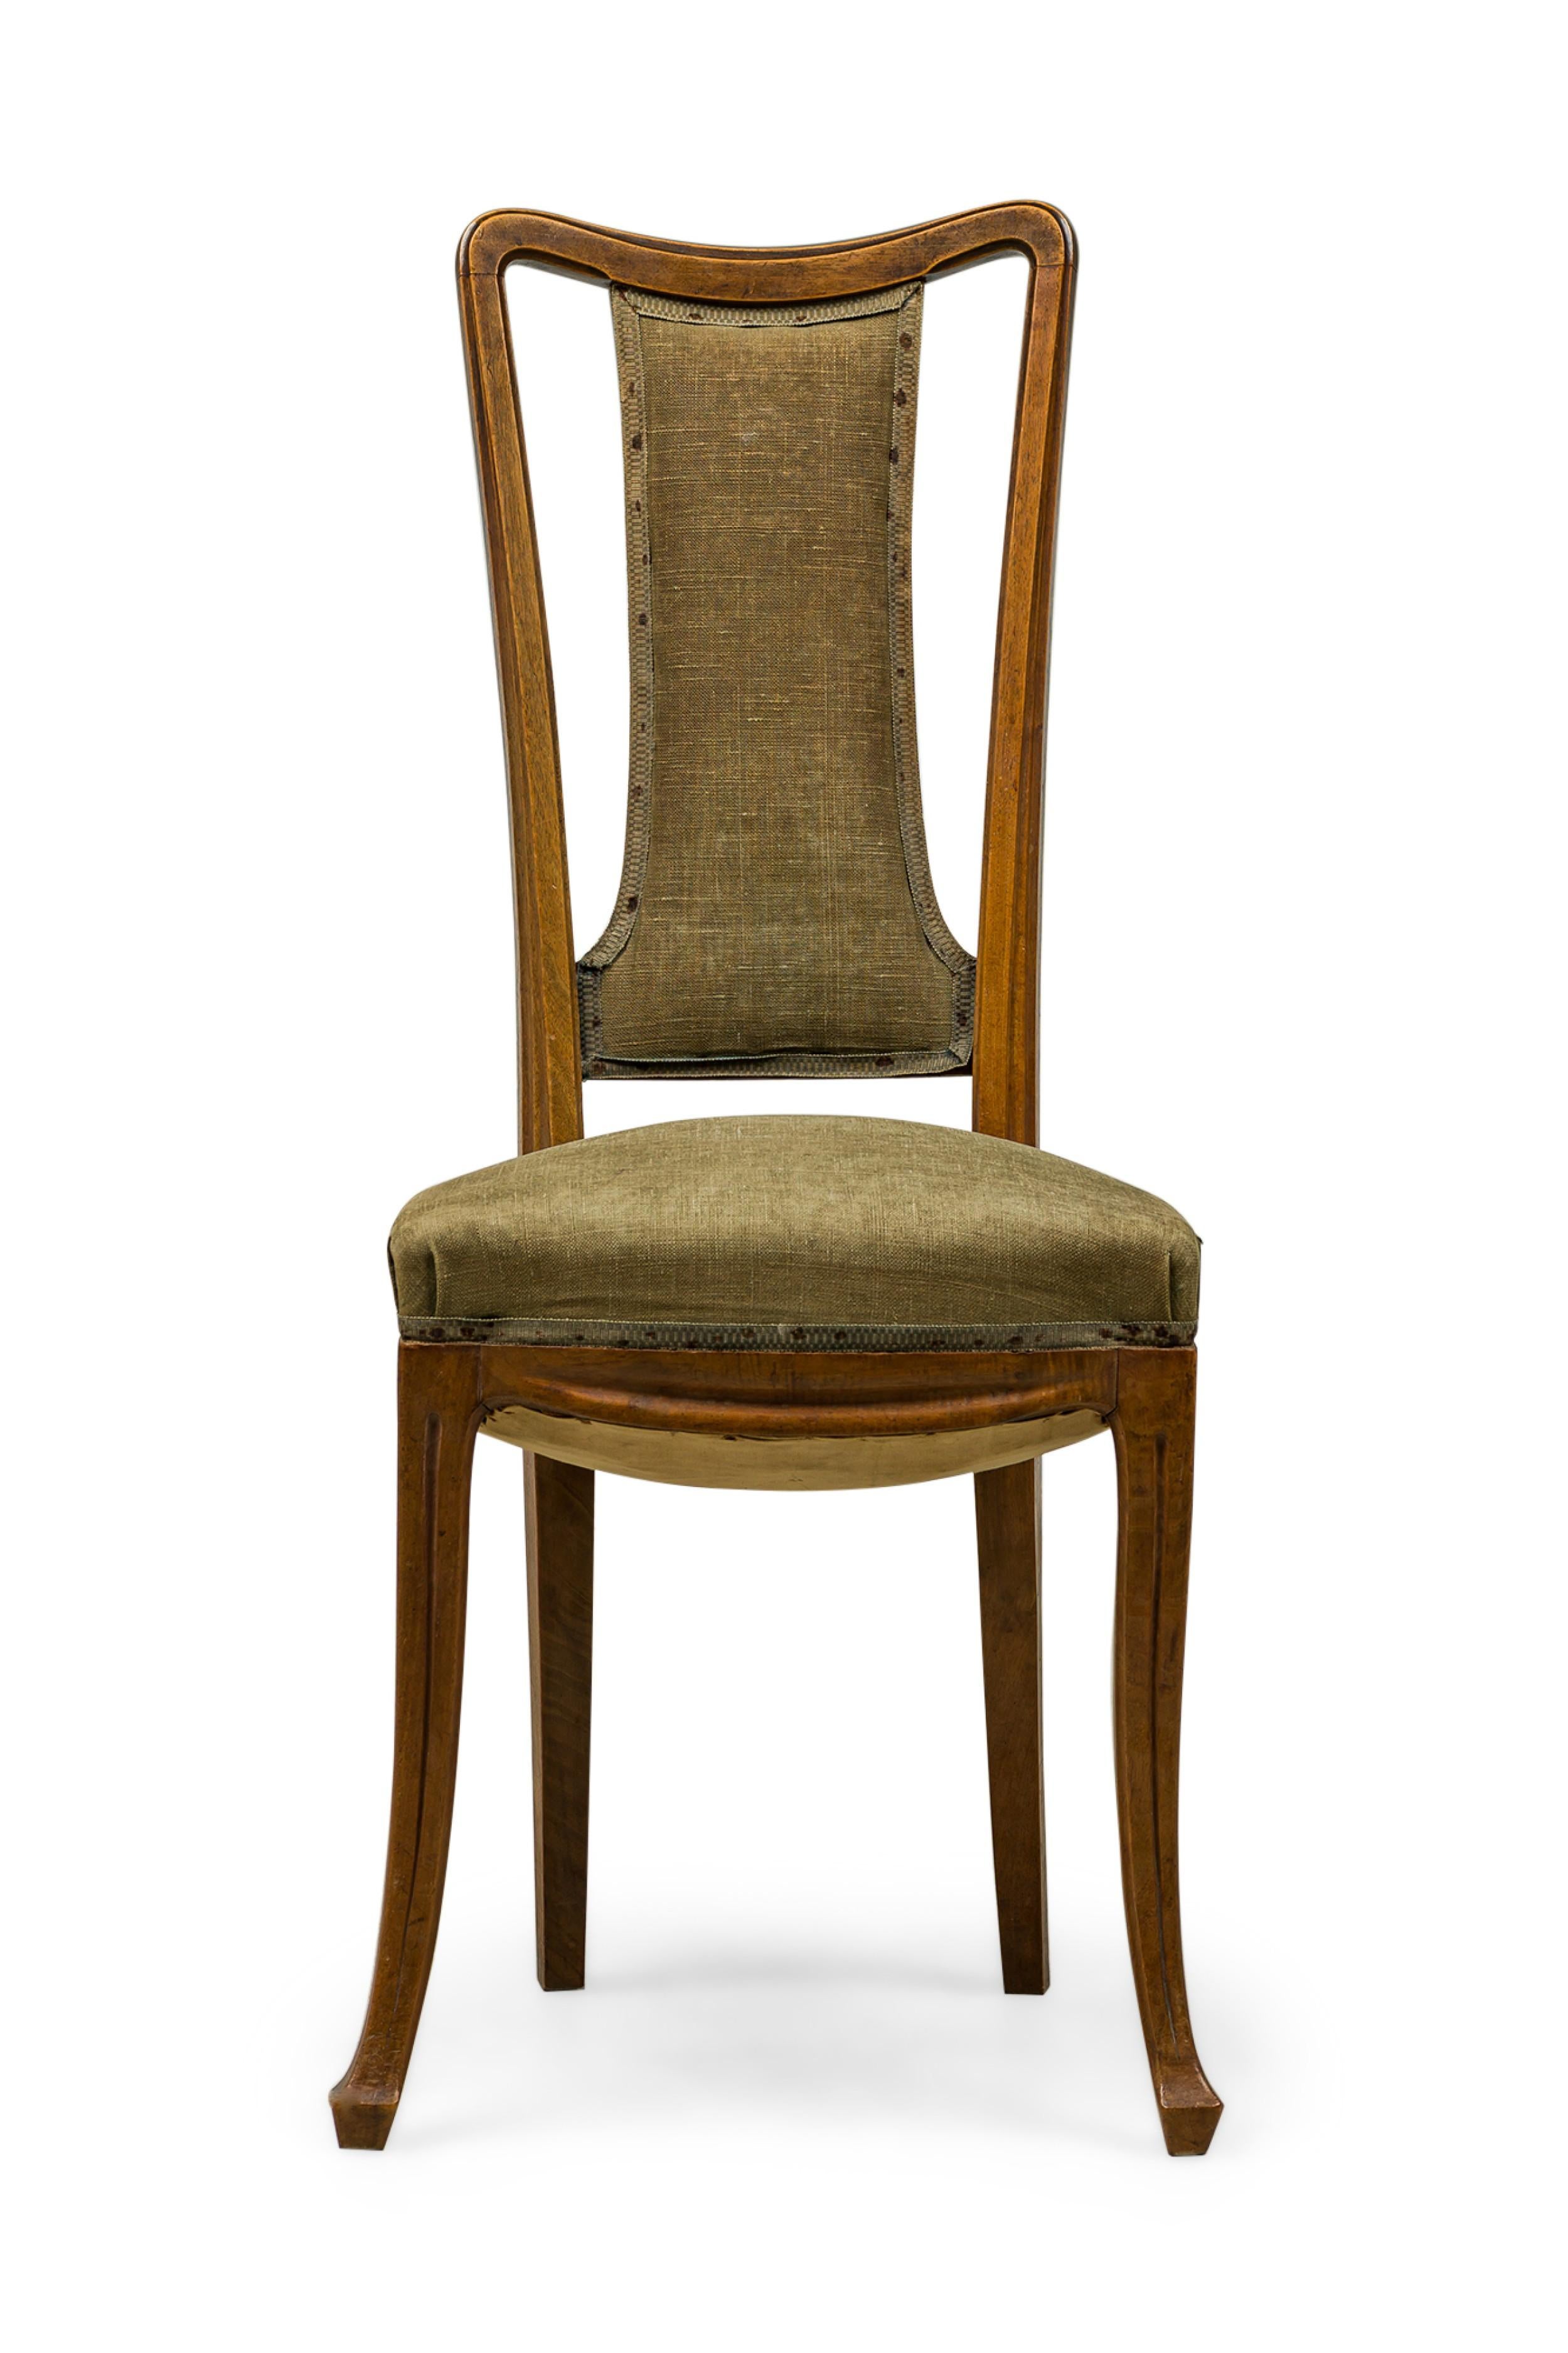 SET of 8 French Art Nouveau side chairs with carved walnut frames, openwork backs featuring a central upholstered section and seat upholstered in a sage green muslin. (LOUIS MAJORELLE)(PRICED AS SET)
 

 Wear to frame finish, some stains and fading